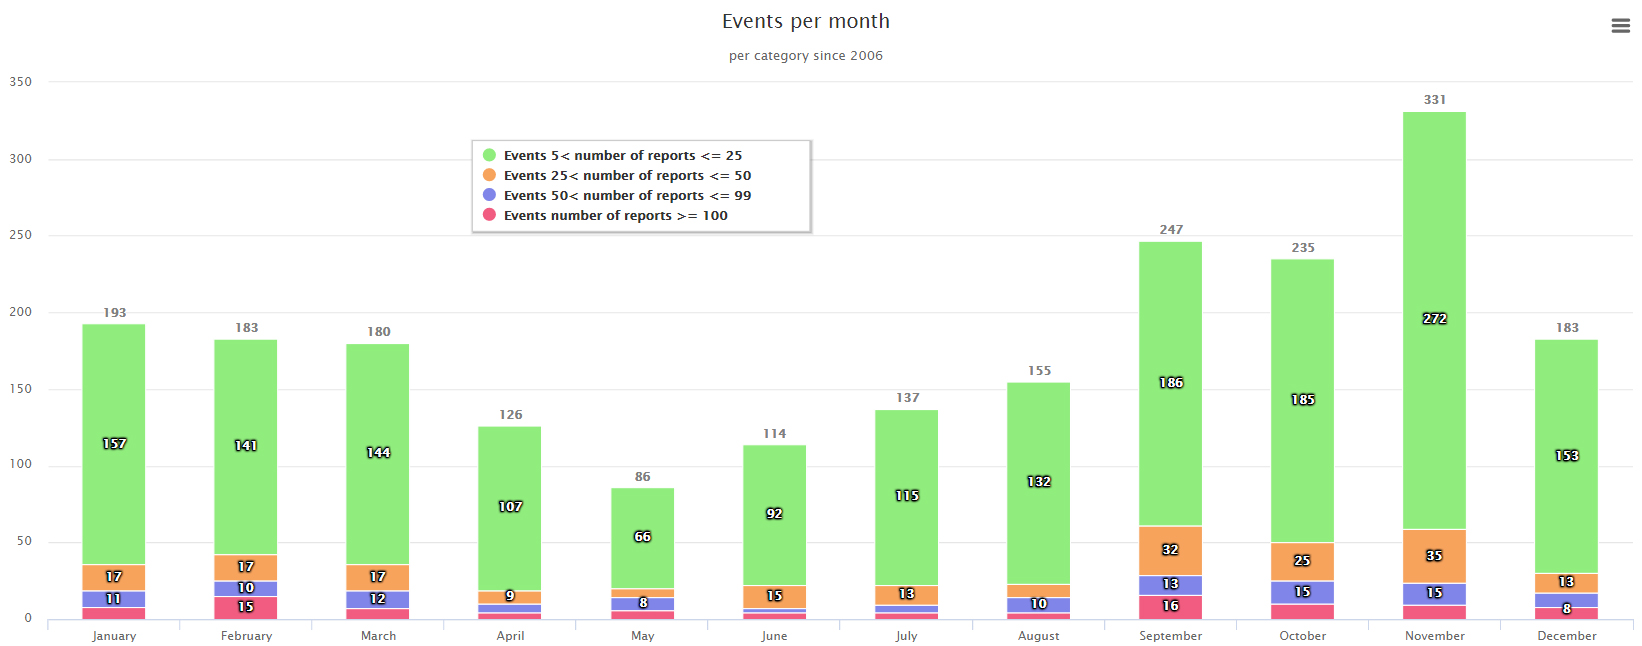 events-per-month-and-category